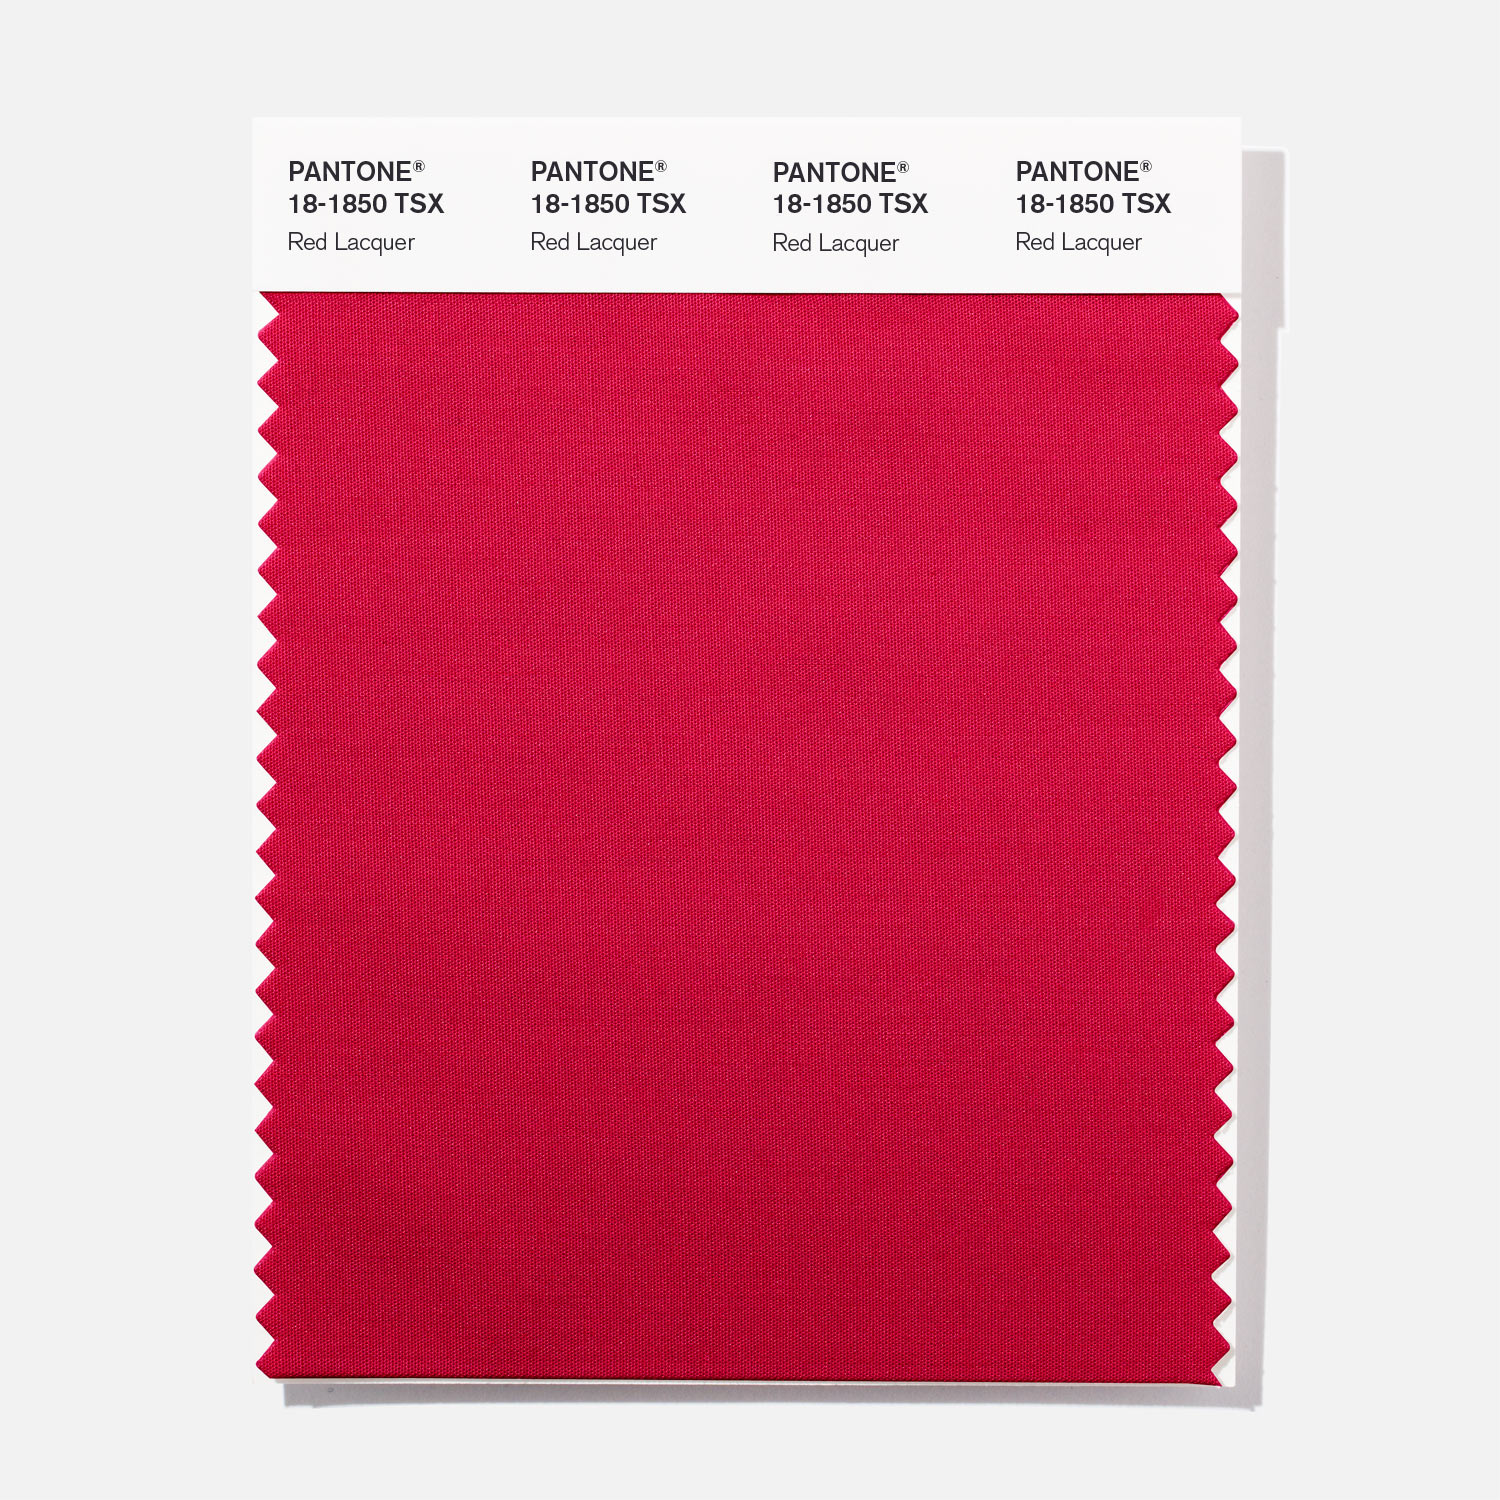 Pantone Polyester Swatch 18-1850 Red Lacquer